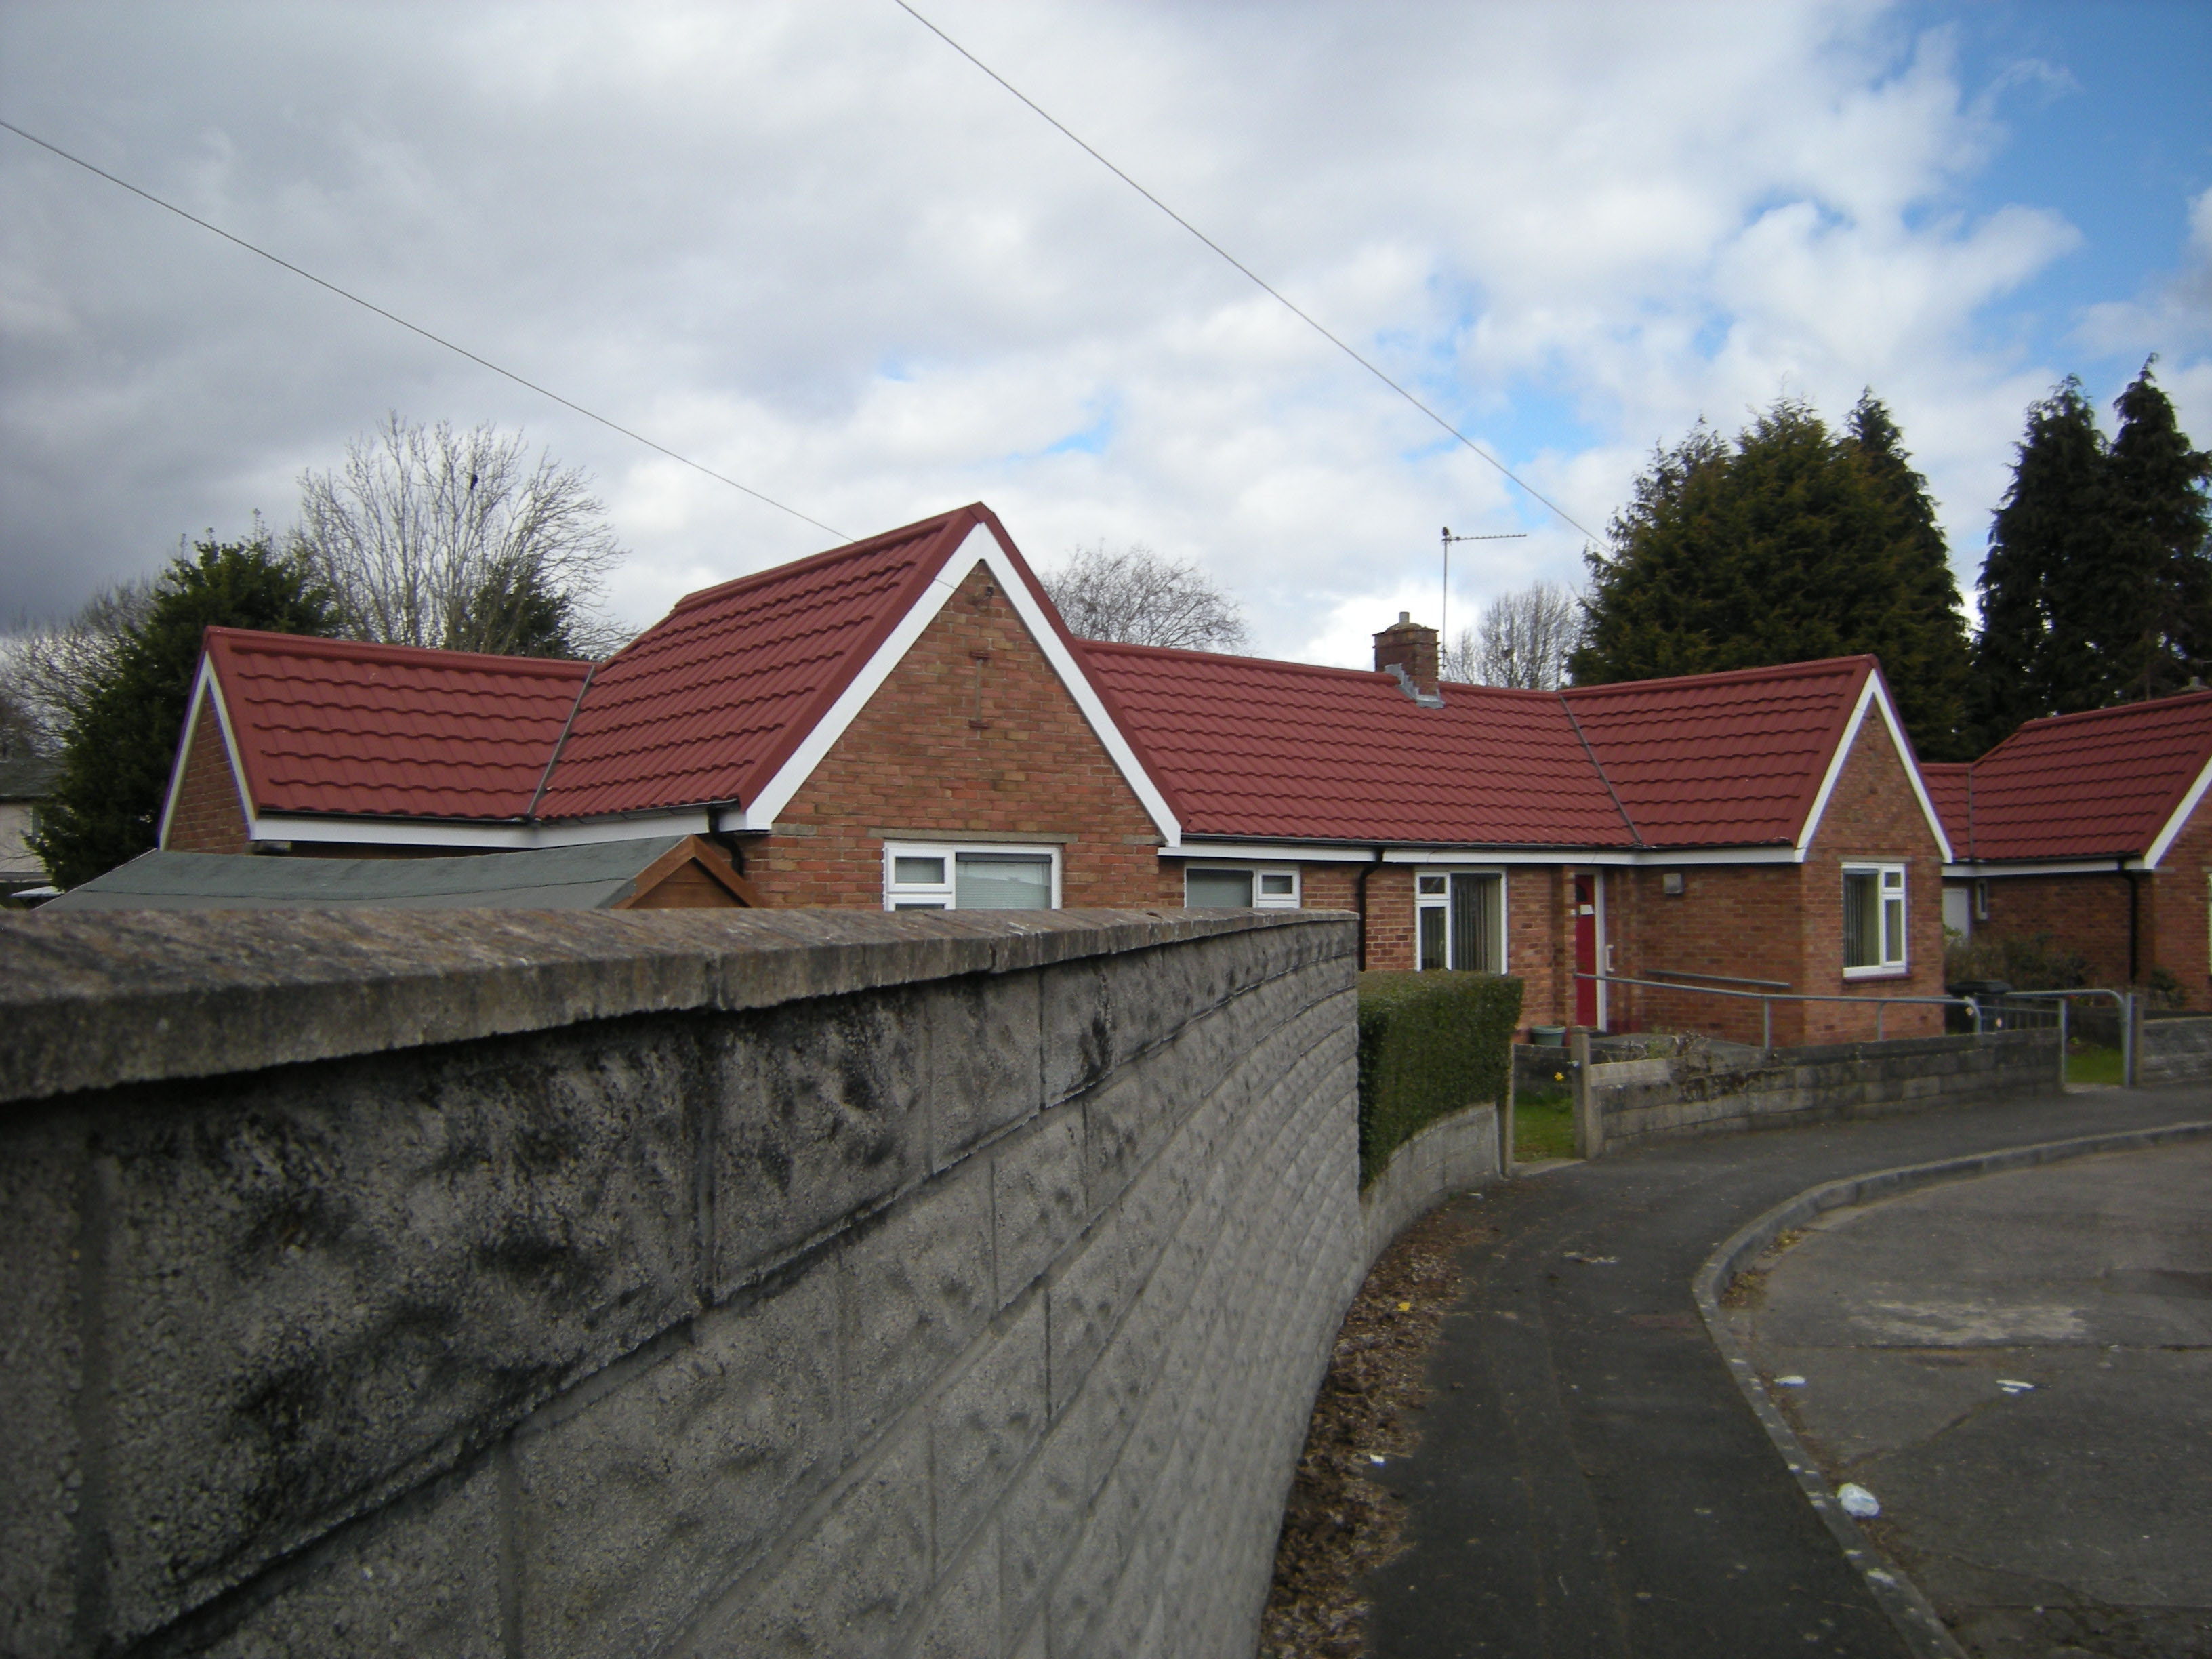 Red Brick Homes in Cardiff Refurbished with Metrotile Lightweight Roofing in Roman Red